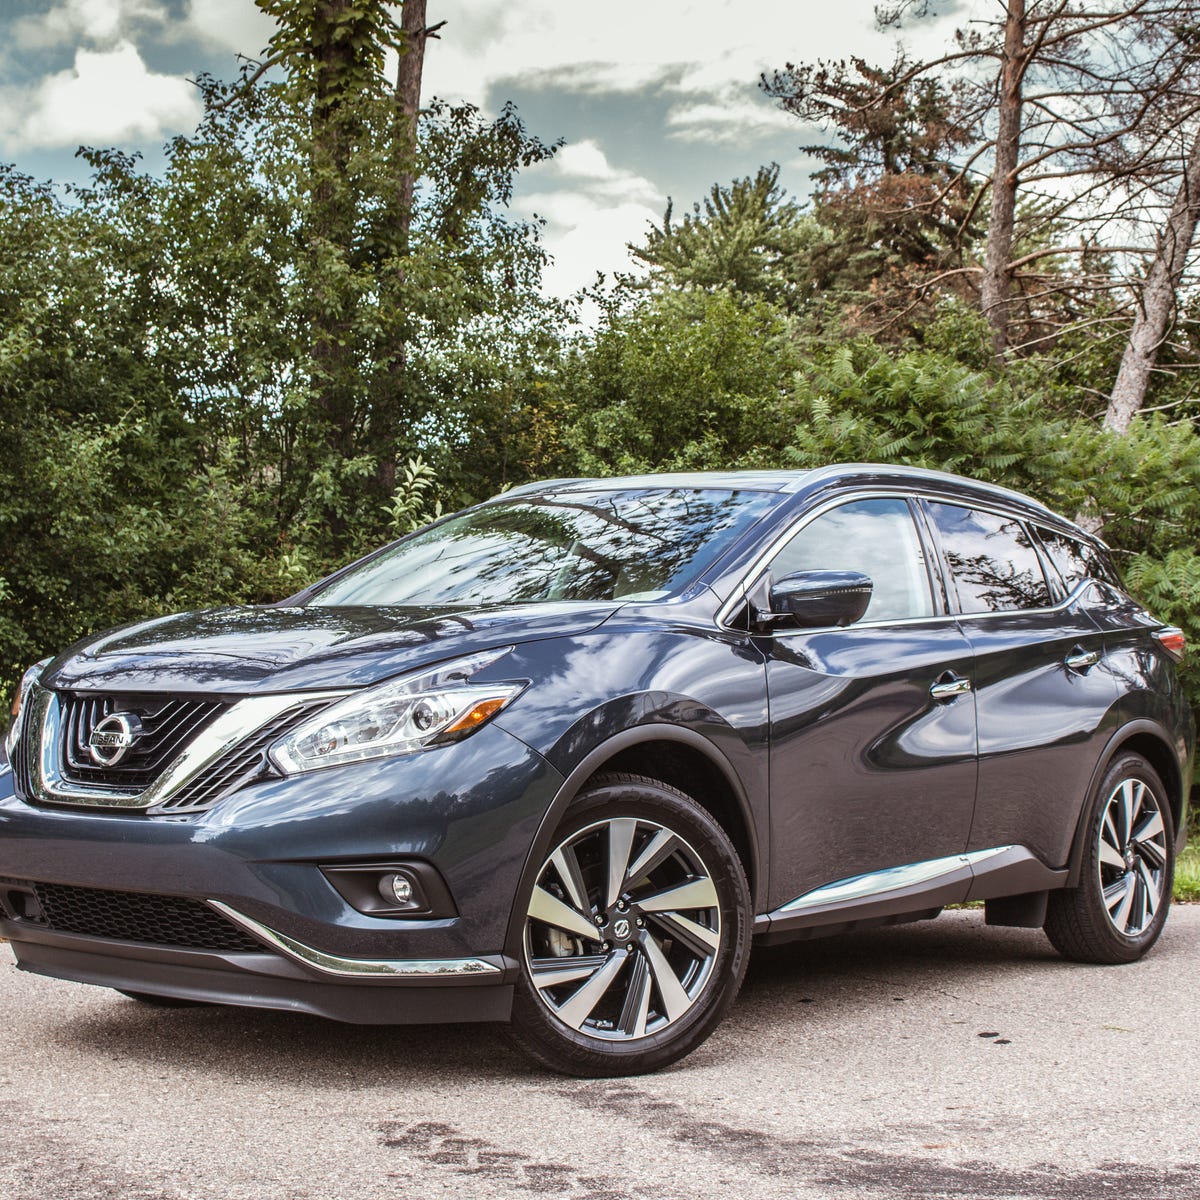 2017 Nissan Murano review: Nissan's midsize crossover SUV is high on style  and function - CNET